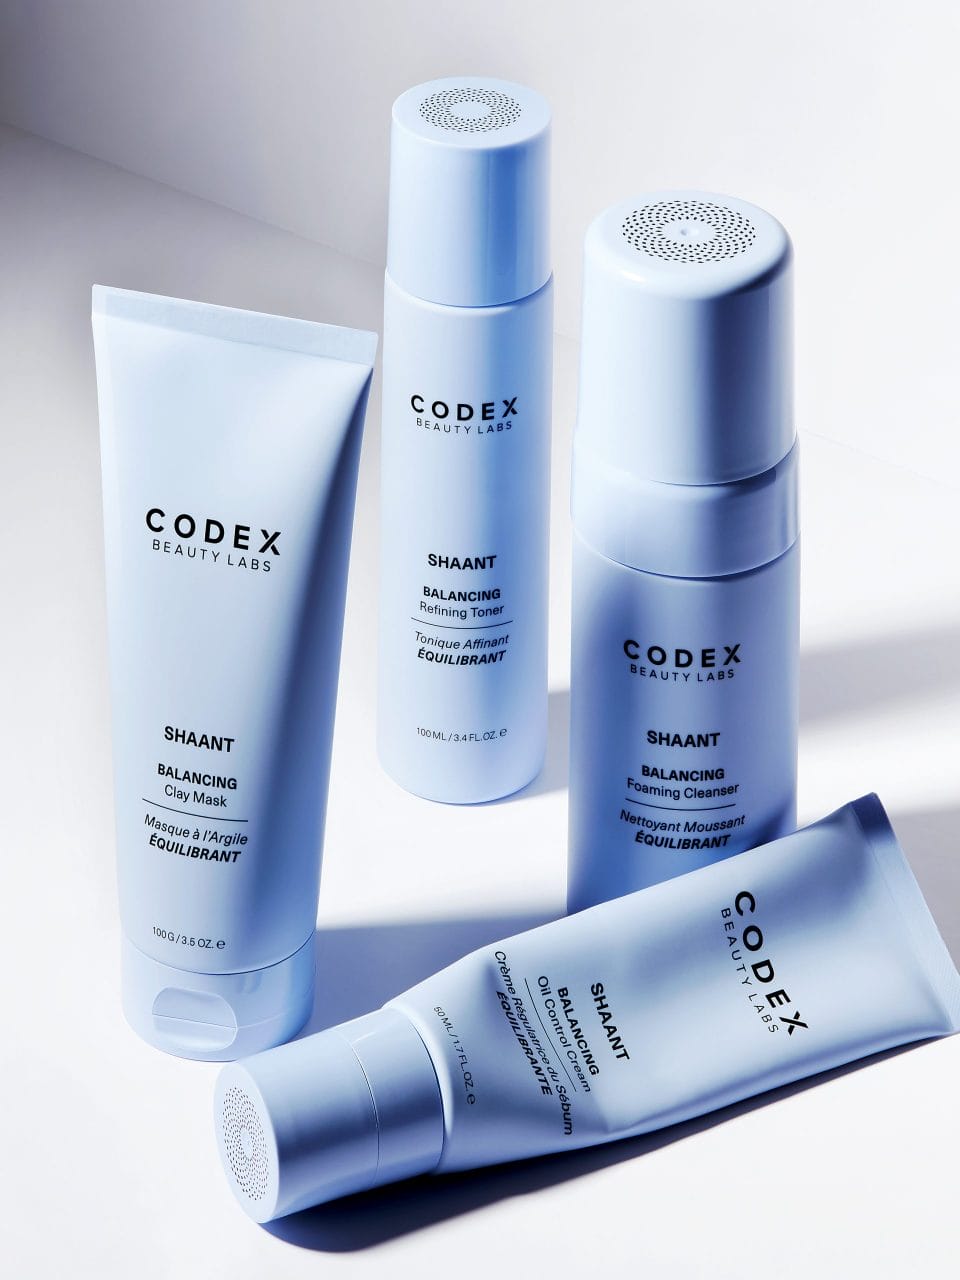 The Codex Beauty Labs Shaant Series Is An Ayurvedic Acne-Fighting Range